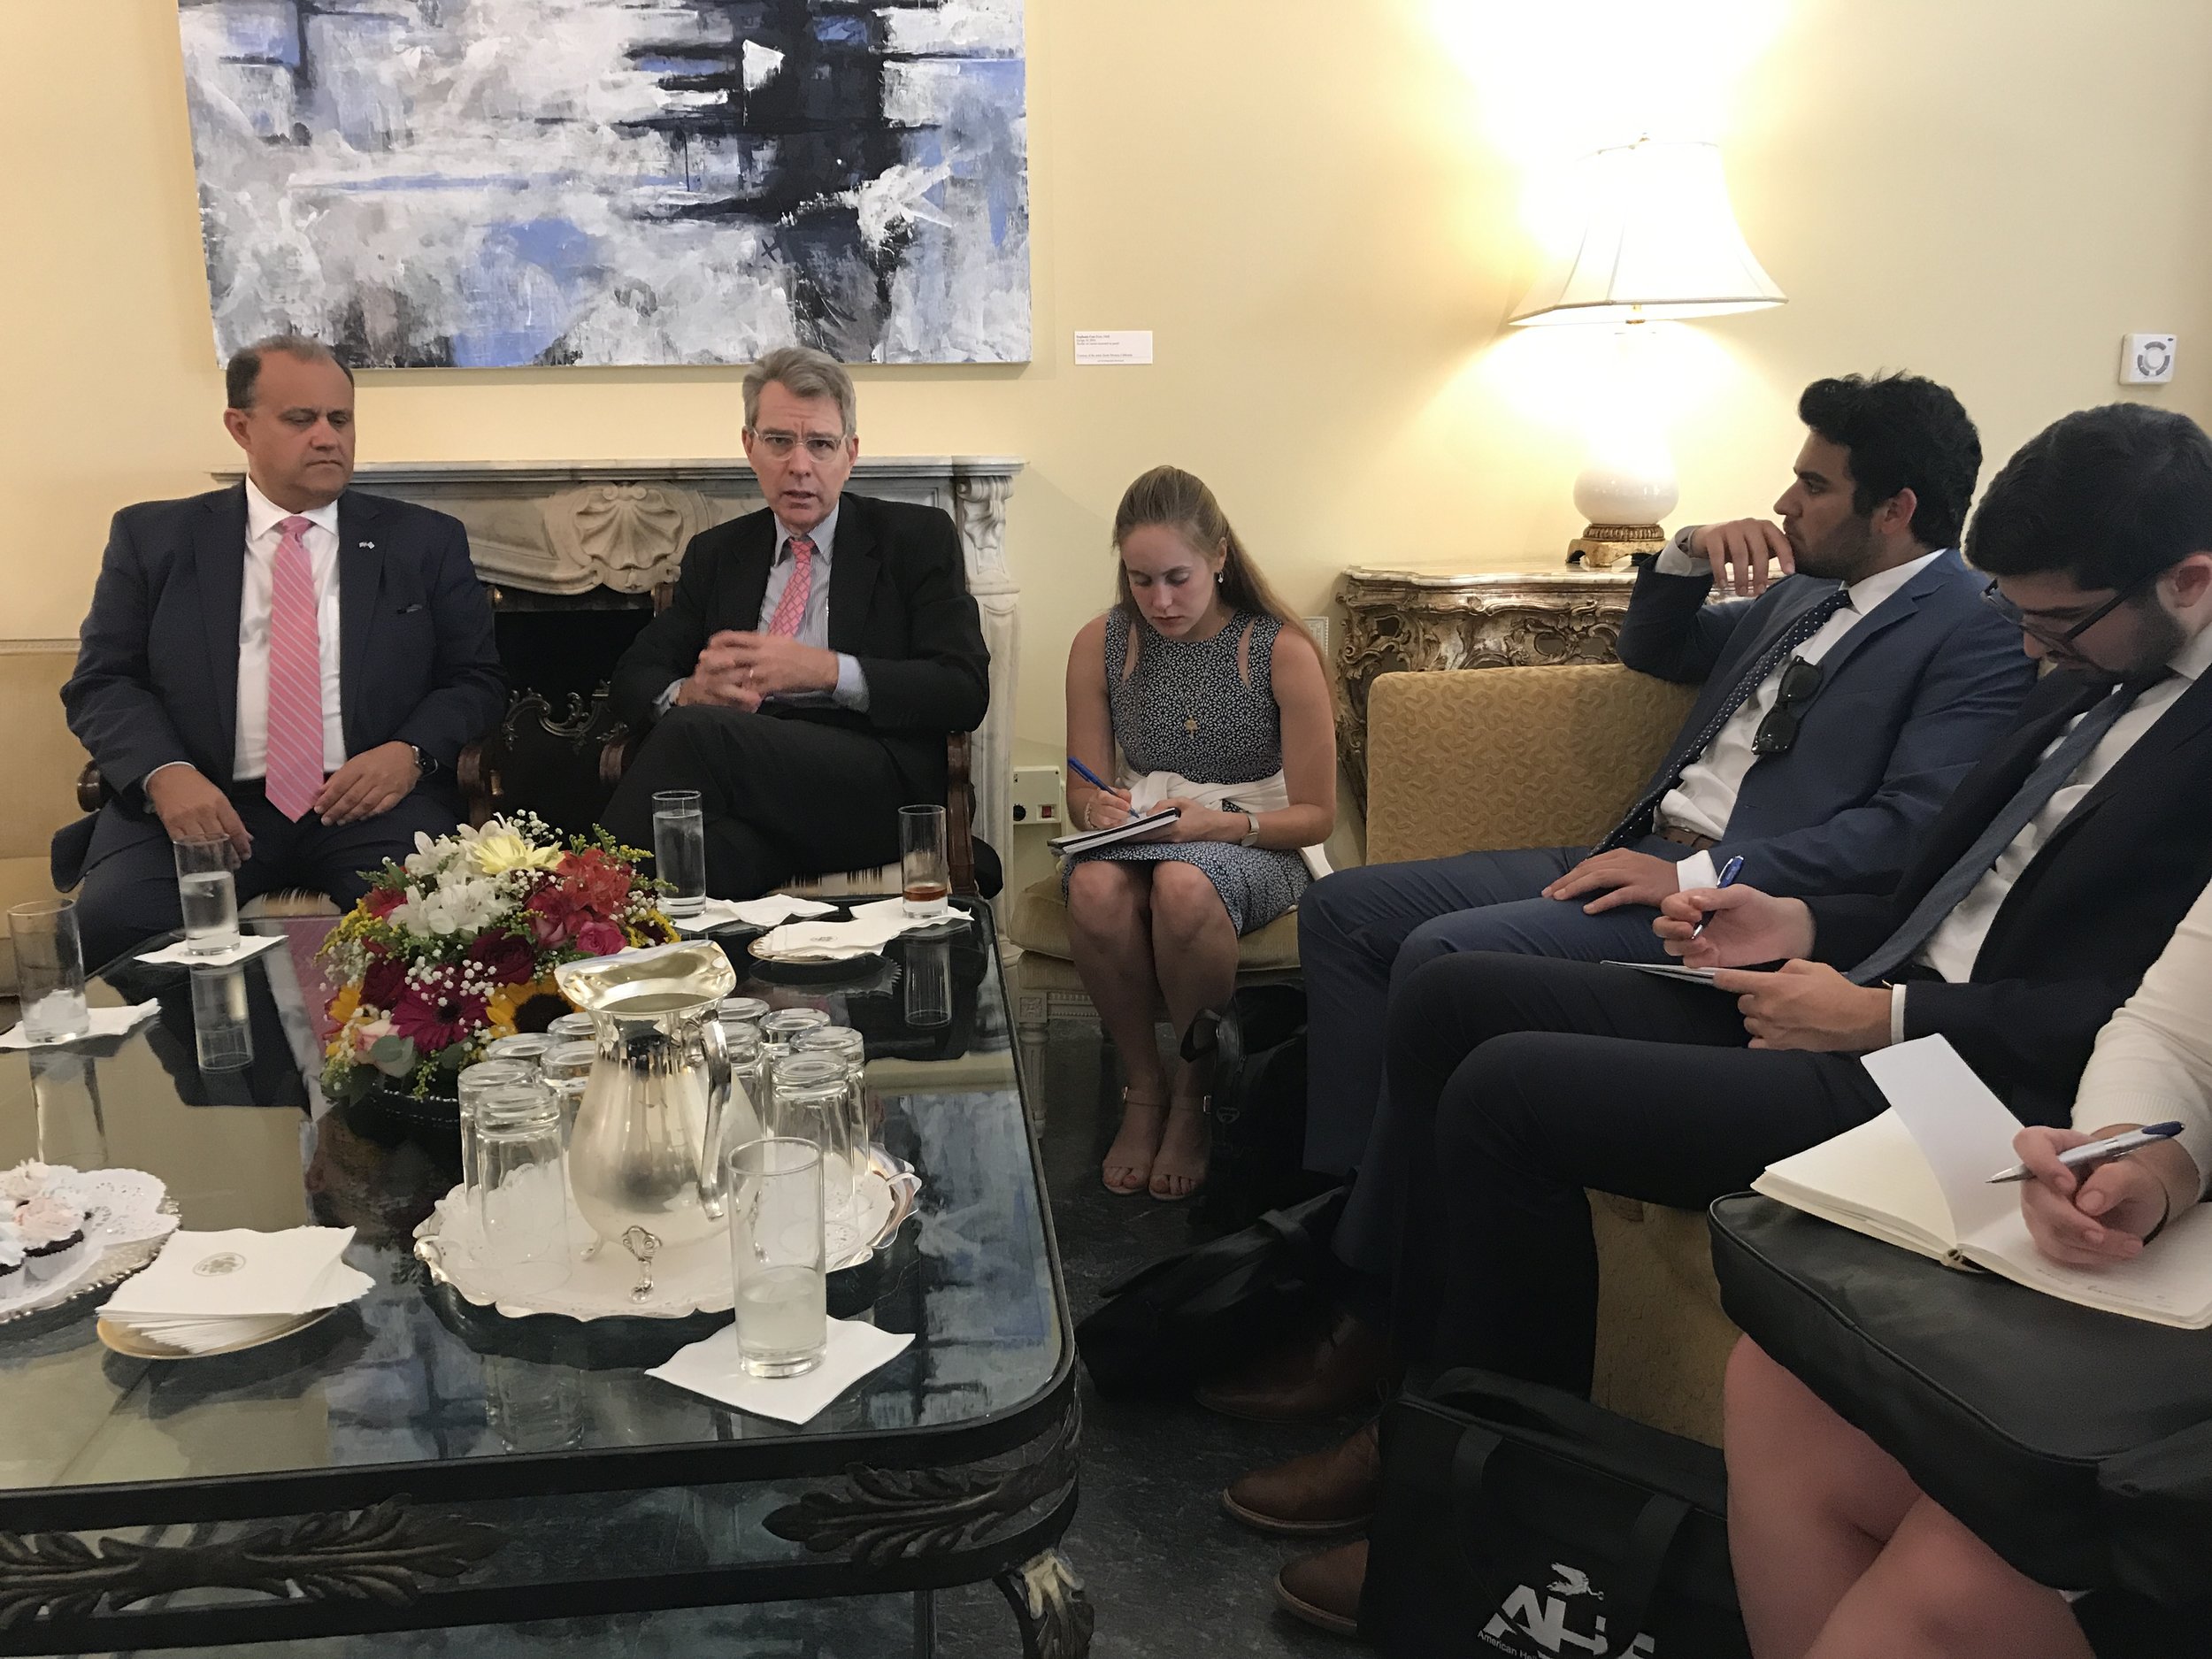  U.S. Ambassador to Greece, Geoffrey Pyatt welcomes students to his residence for a briefing on U.S. interests and initiatives in Greece. 